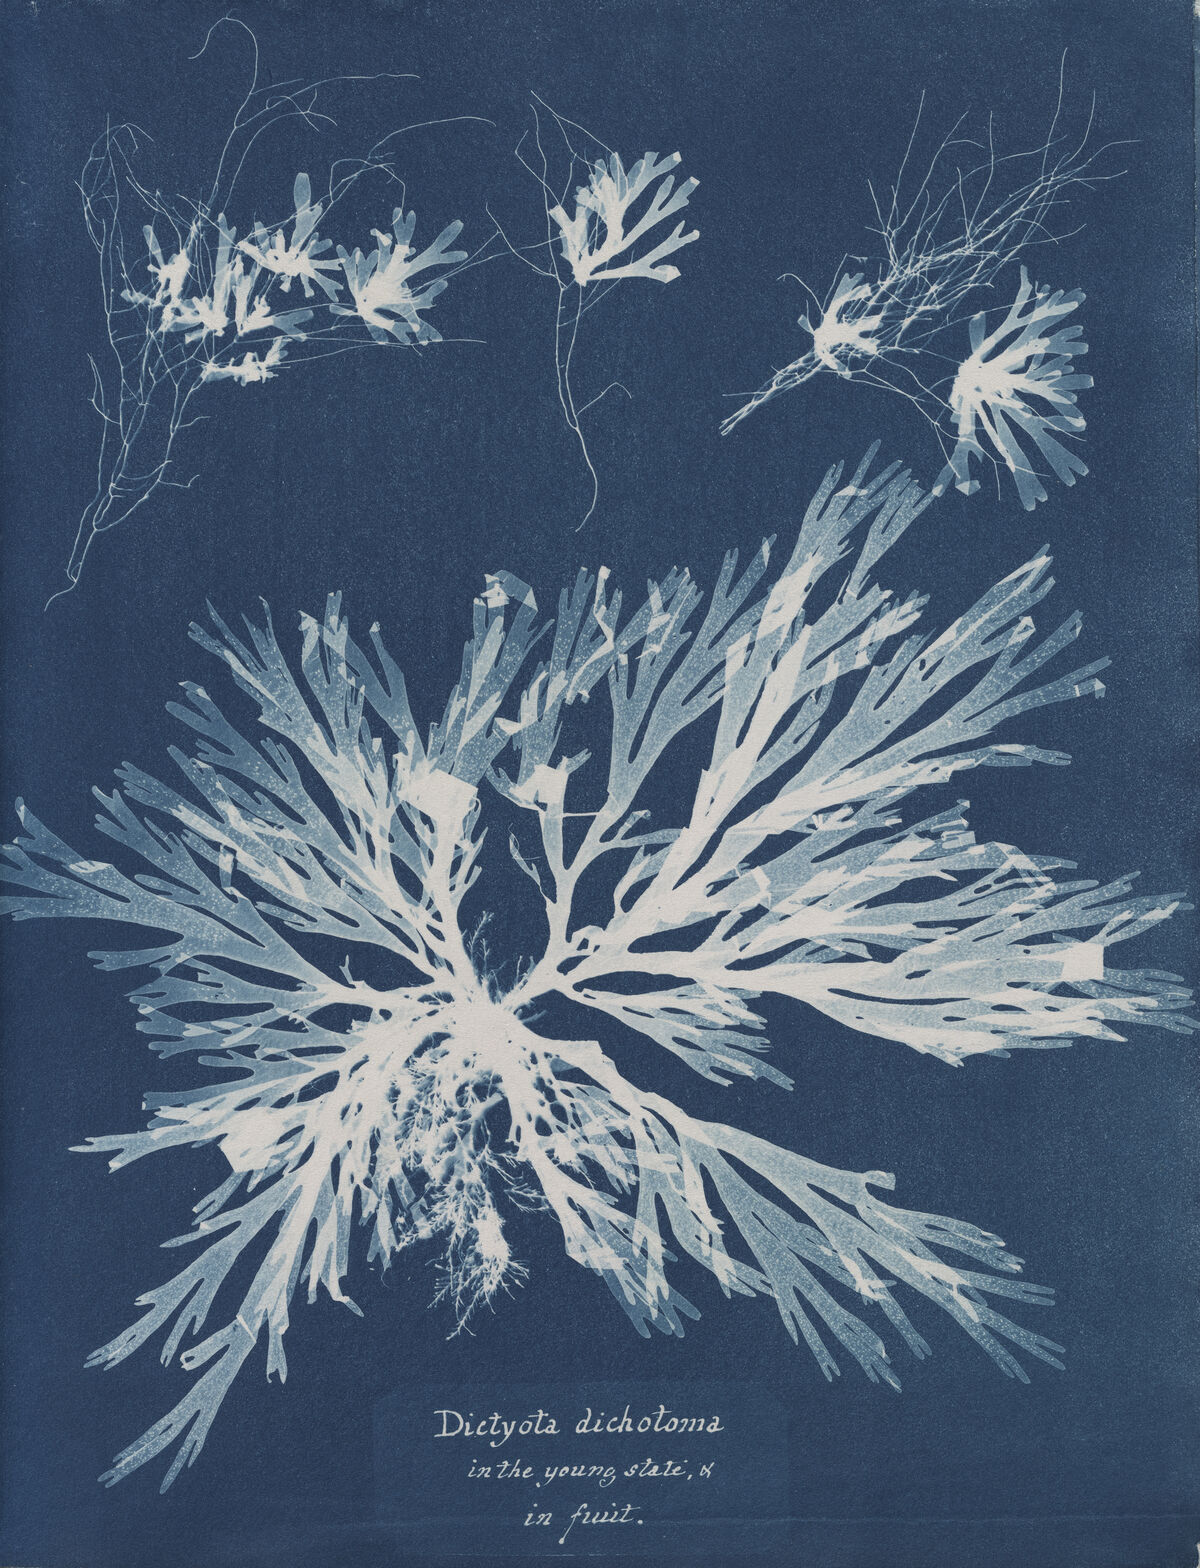 Anna Atkins, Dictyota dichotoma, in the young state &amp; in fruit, from Part XI of Photographs of British Algae: Cyanotype Impressions, 1849-1850. Courtesy of The New York Public Library.